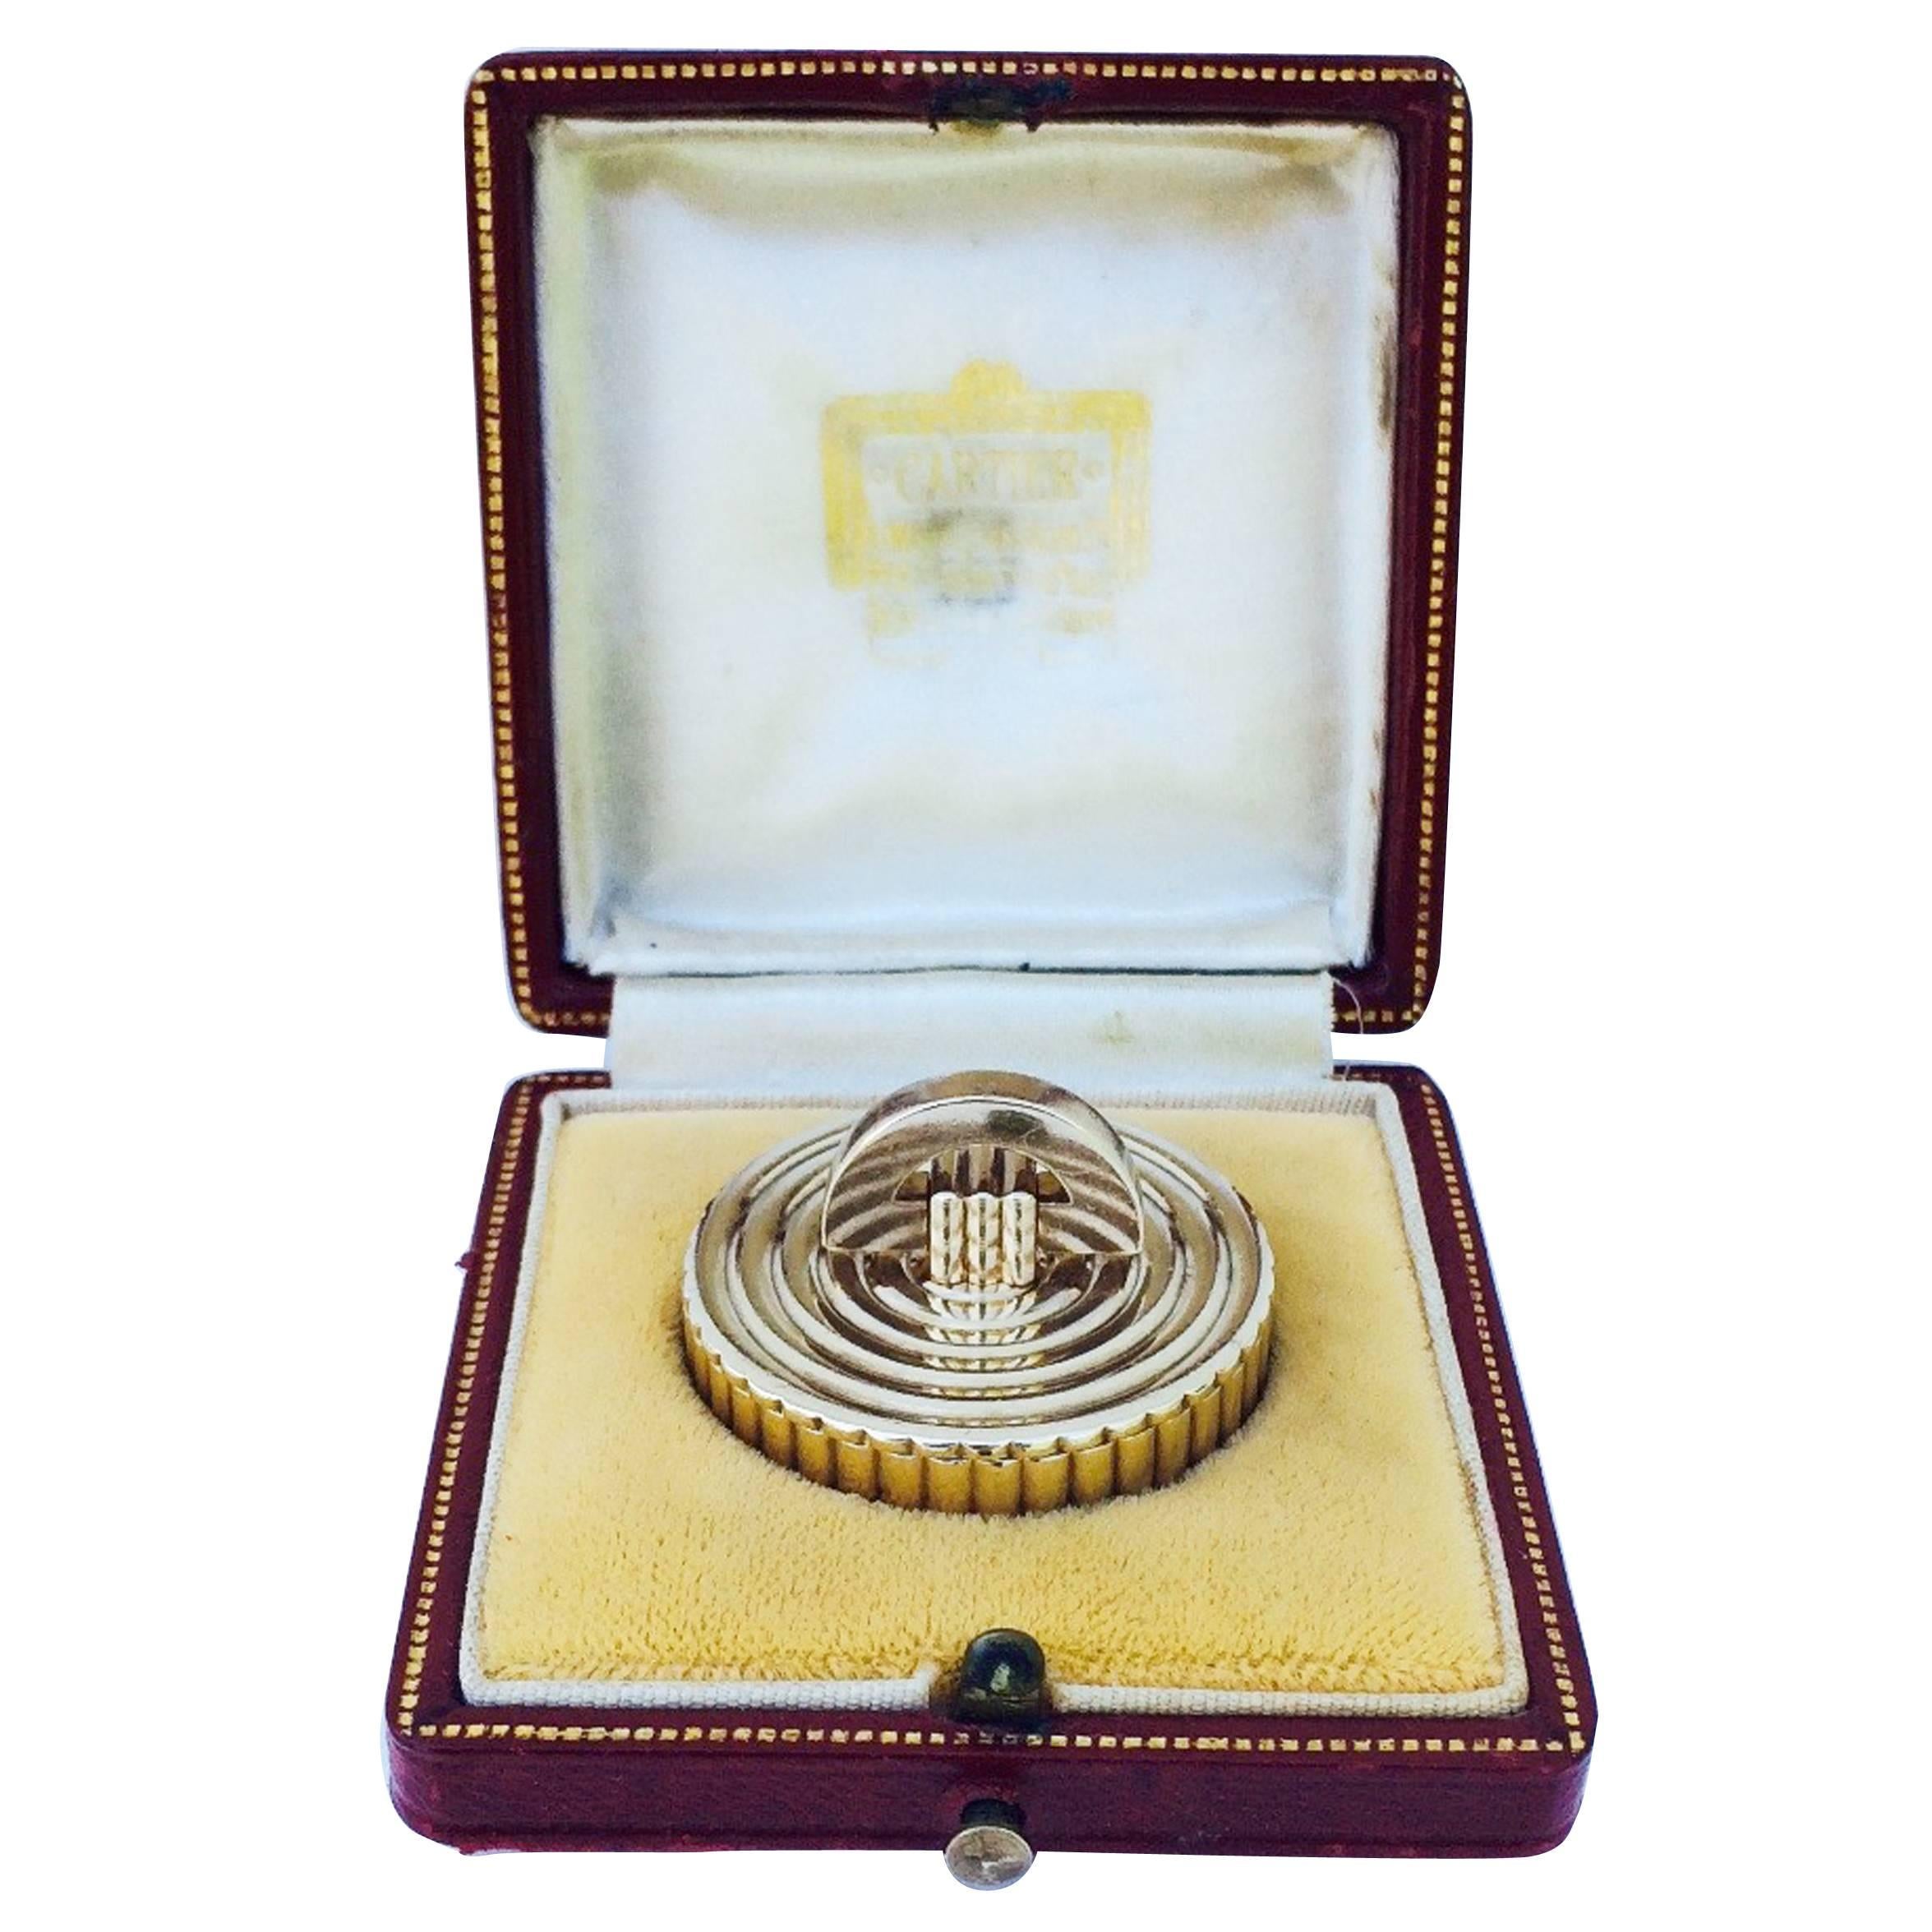 Cartier London Gold Pill Box with Original Fitted Case 1953 Elizabeth Coronation For Sale